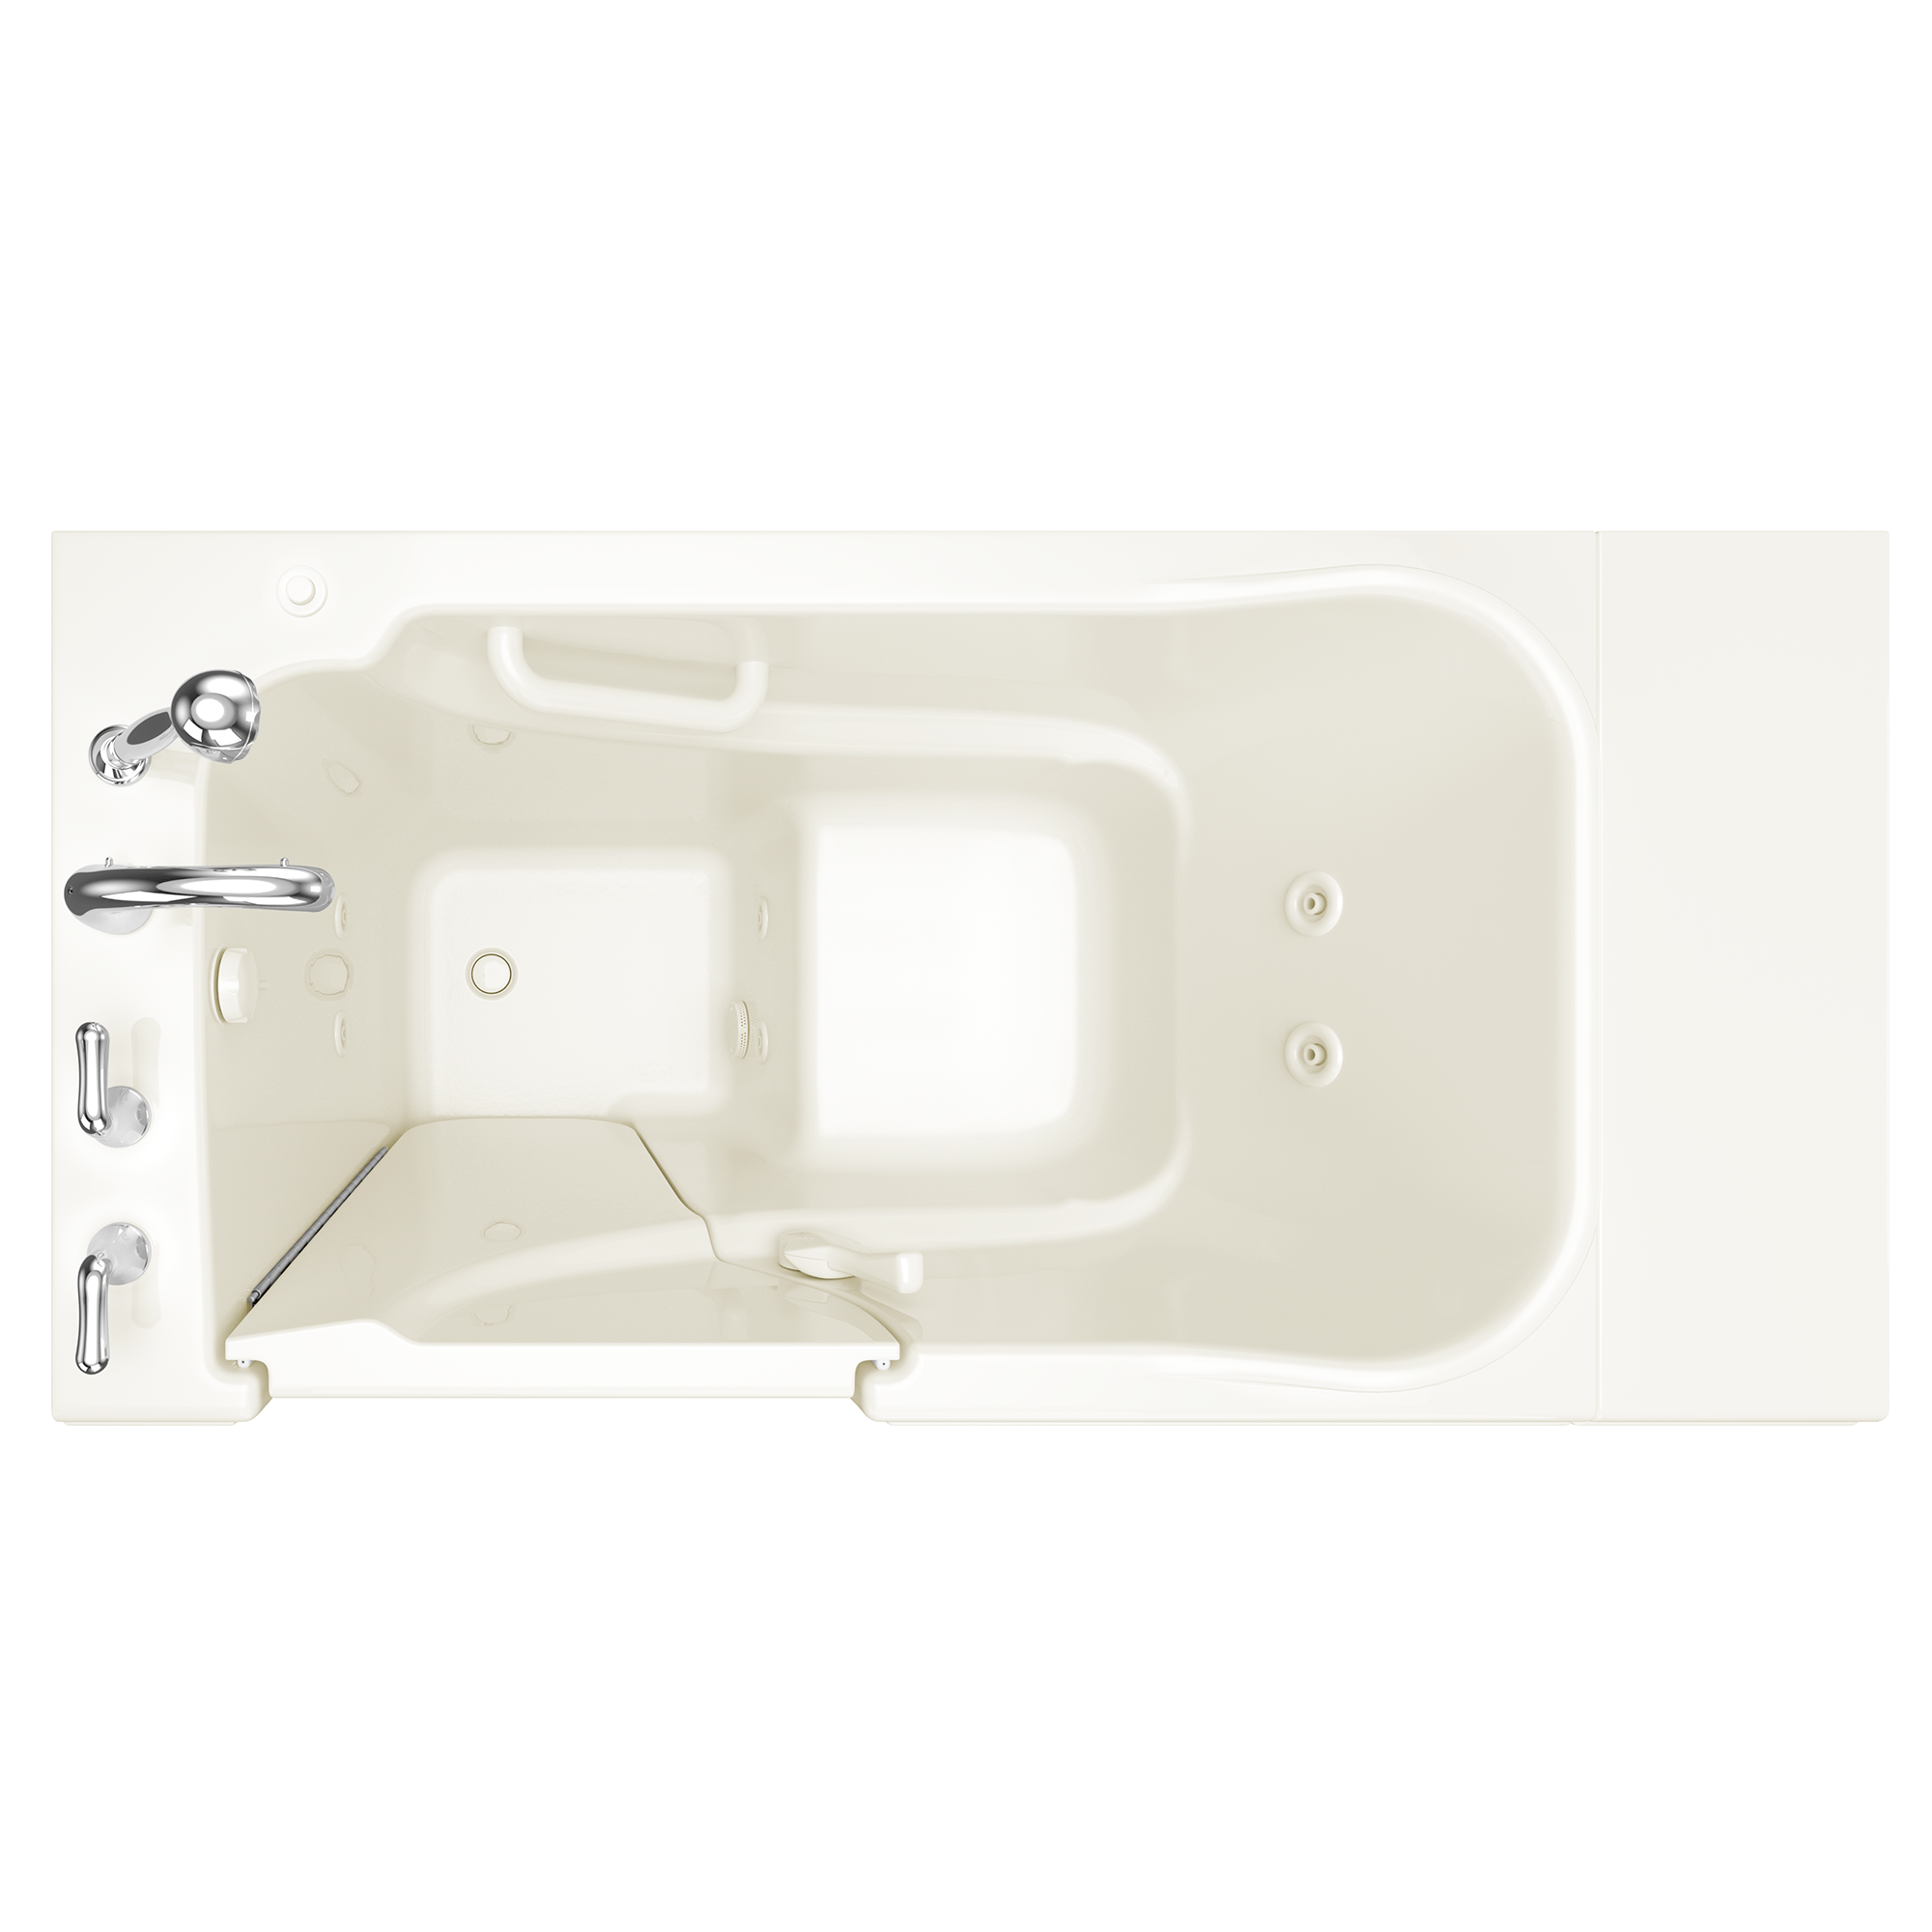 Gelcoat Entry Series 52 x 30 Inch Walk In Tub With Whirlpool System - Left Hand Drain With Faucet BISCUIT